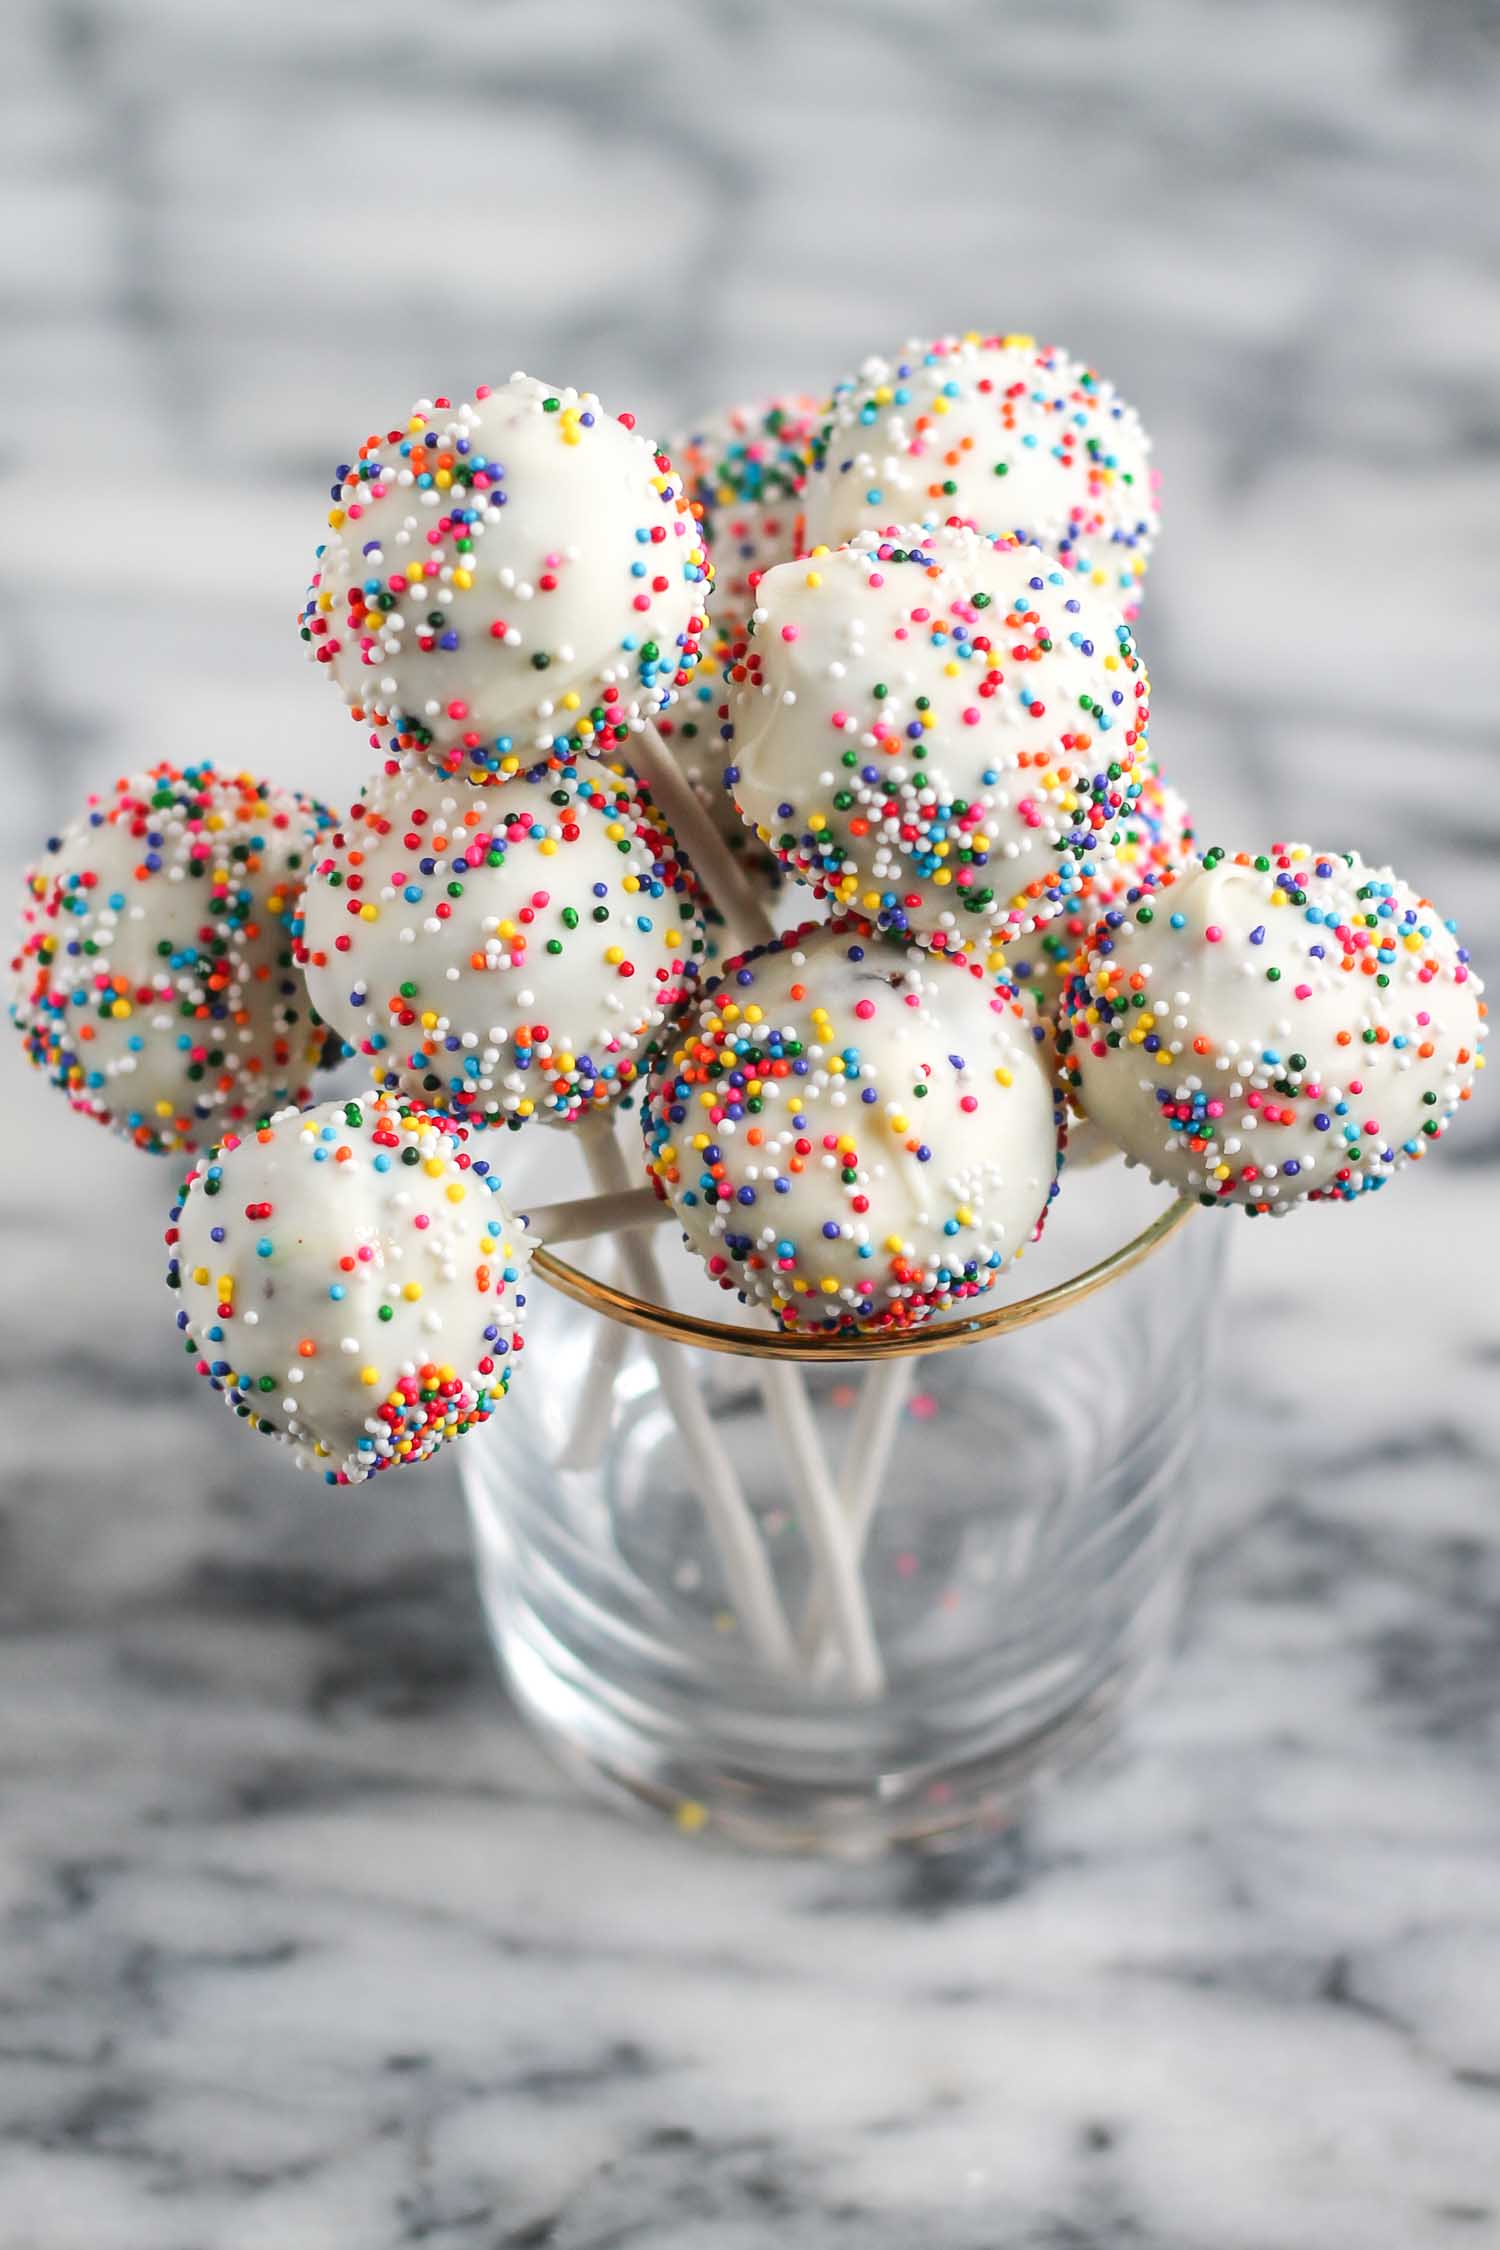 20 Of the Best Ideas for Birthday Cake Pops Recipe - Home, Family, Style and Art Ideas